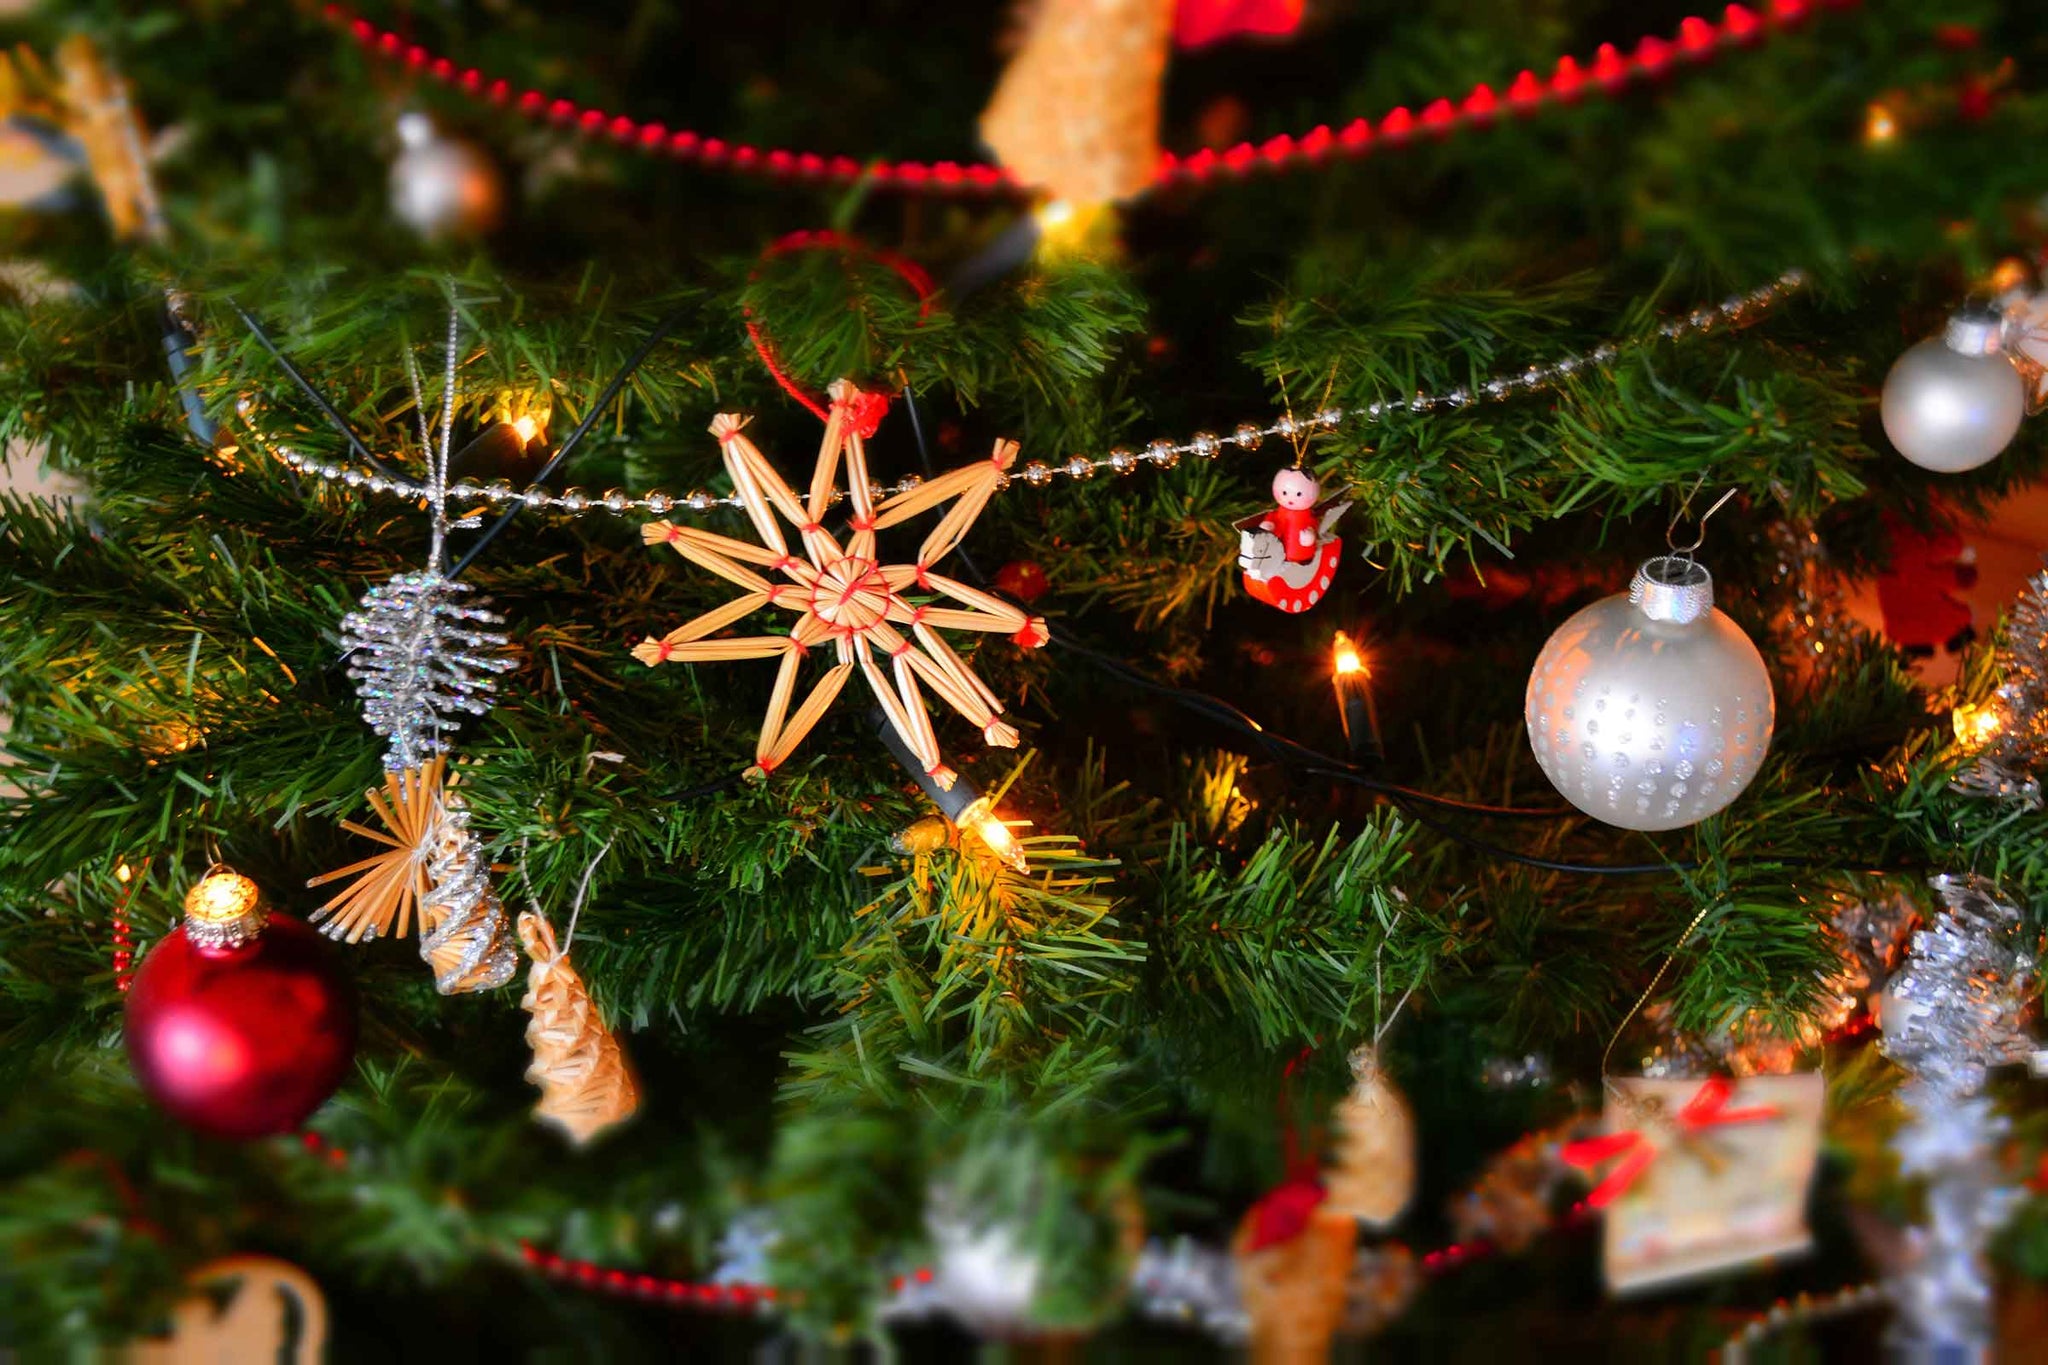 Year-Round Christmas Tree Decorating Ideas - A Tree for Every Month!